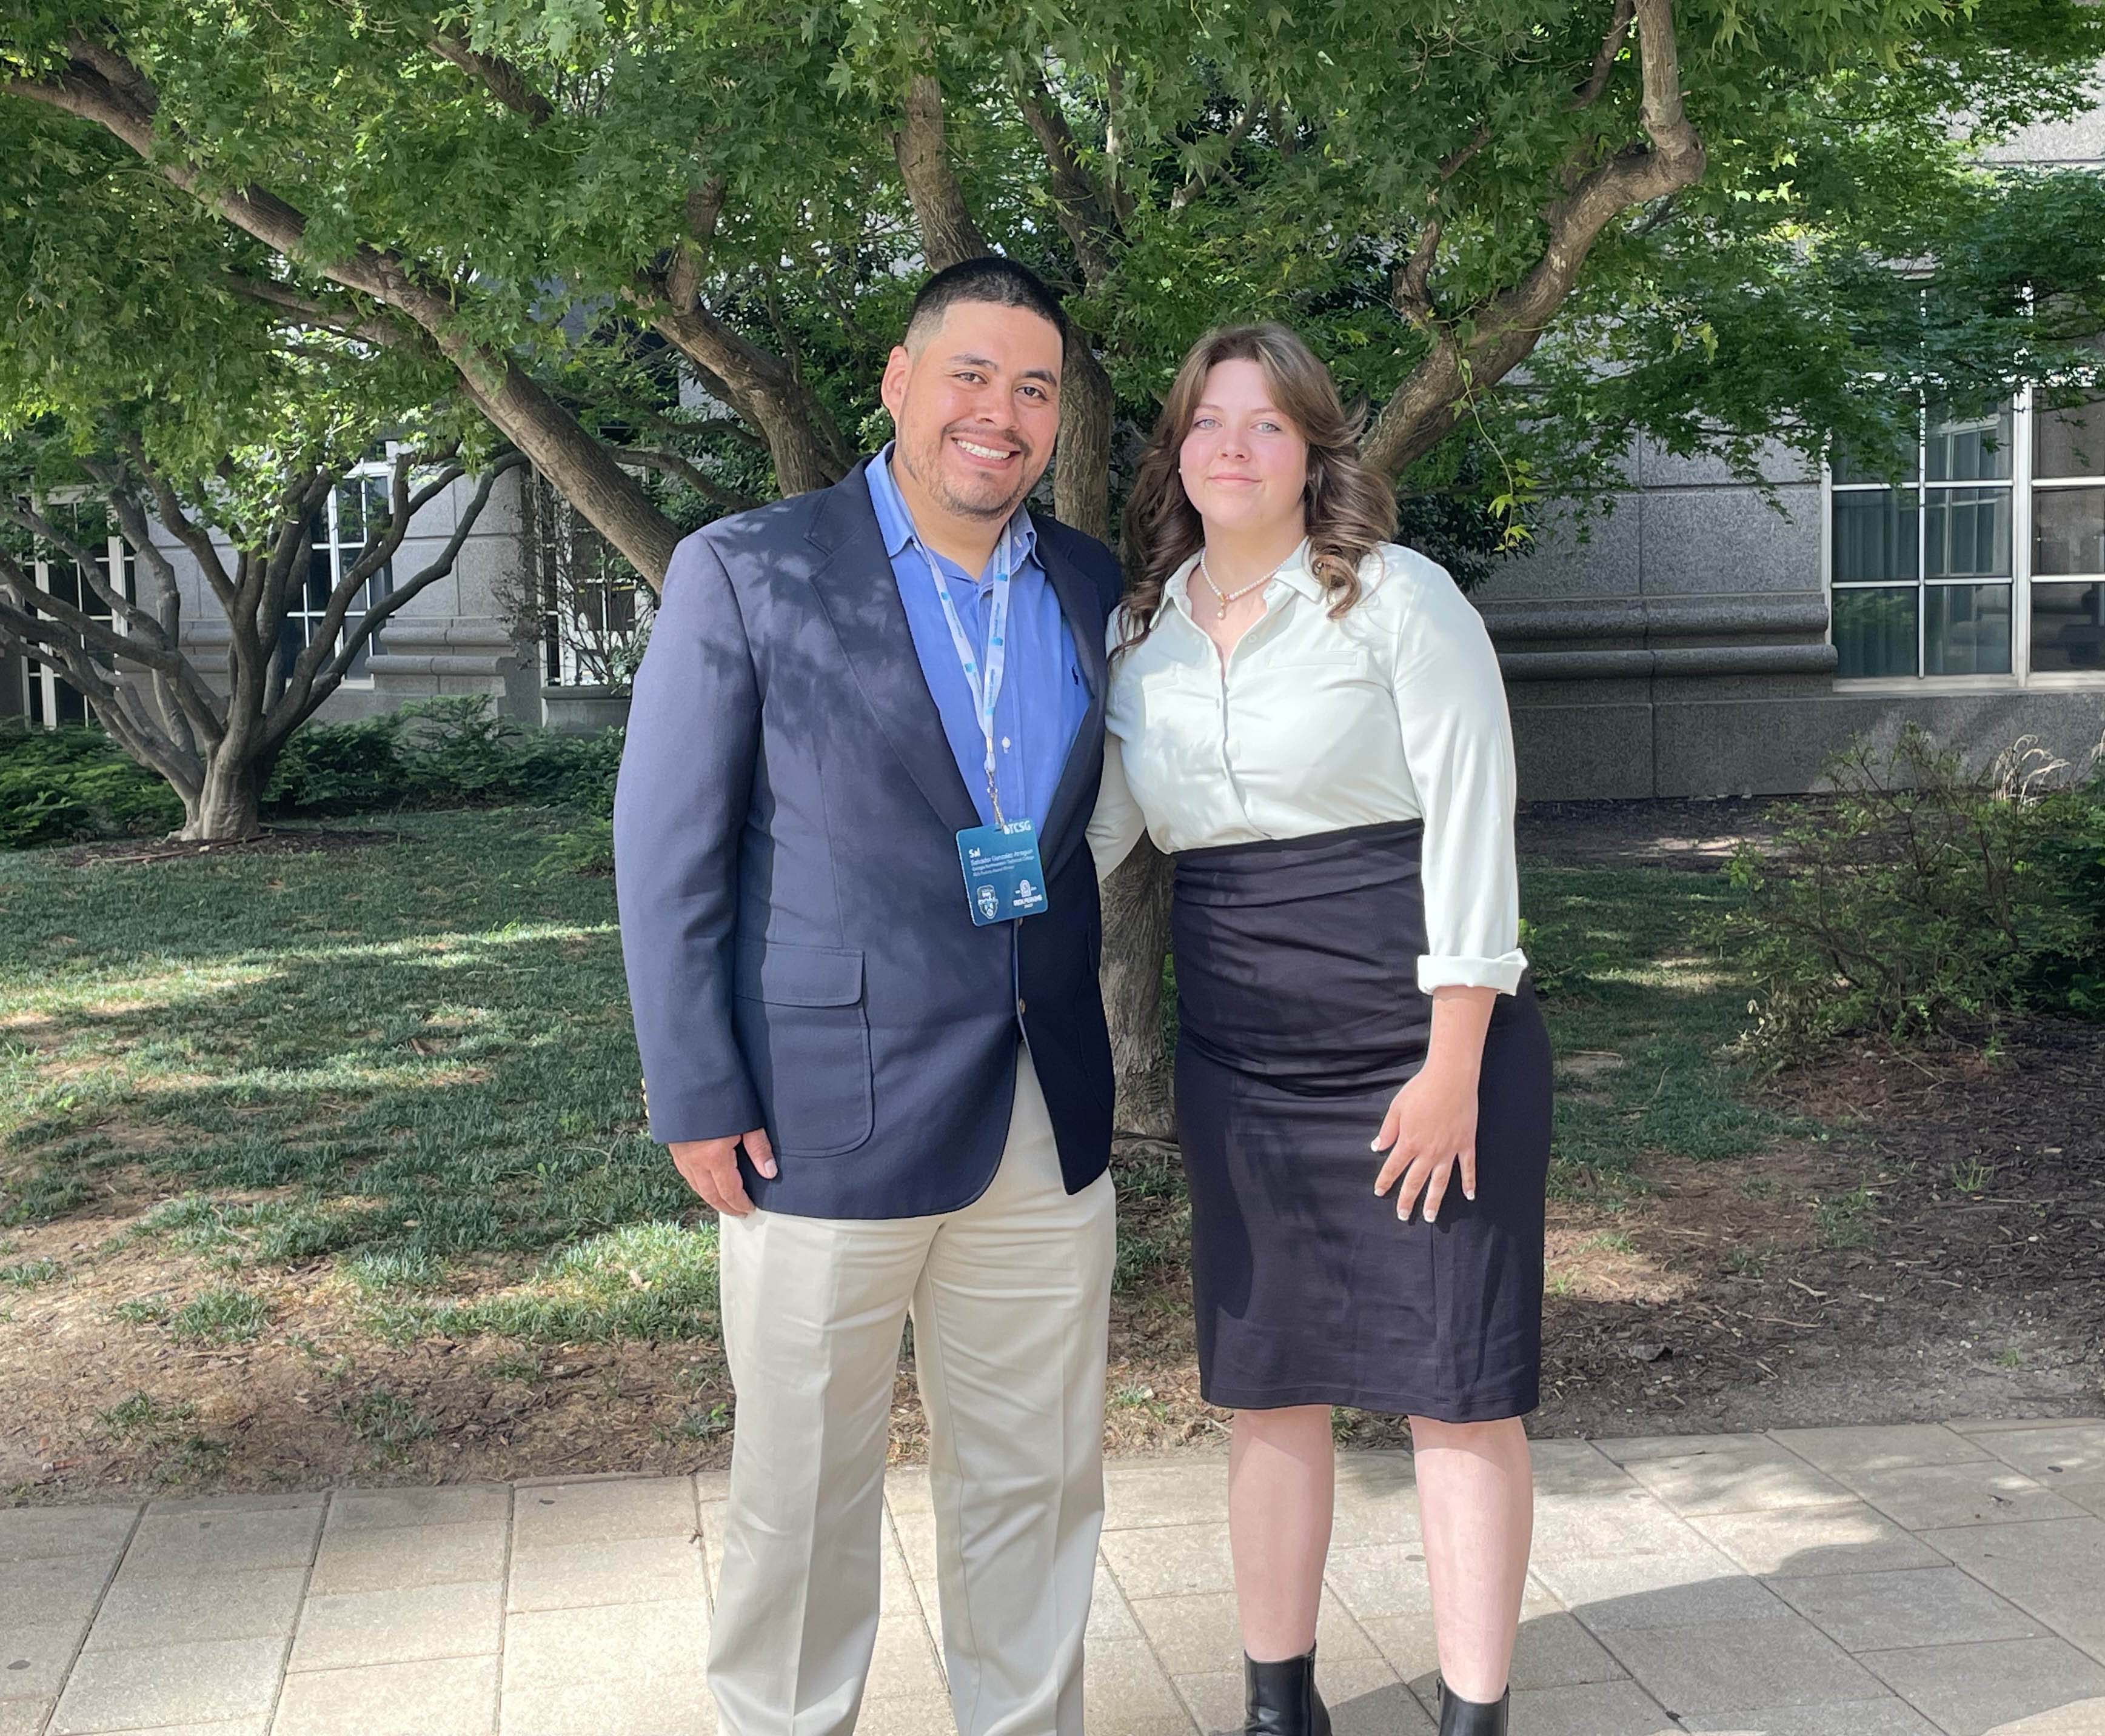 Salvador Gonzalez, program director and instructor of Diesel Equipment Technology at GNTC, (left) is a regional finalist in the competition to be named the state’s 2023 Rick Perkins Instructor of the Year, and GNTC student Cayla Pemberton has been named a regional finalist in the 2023 Georgia Occupation Award of Leadership (GOAL) competition.